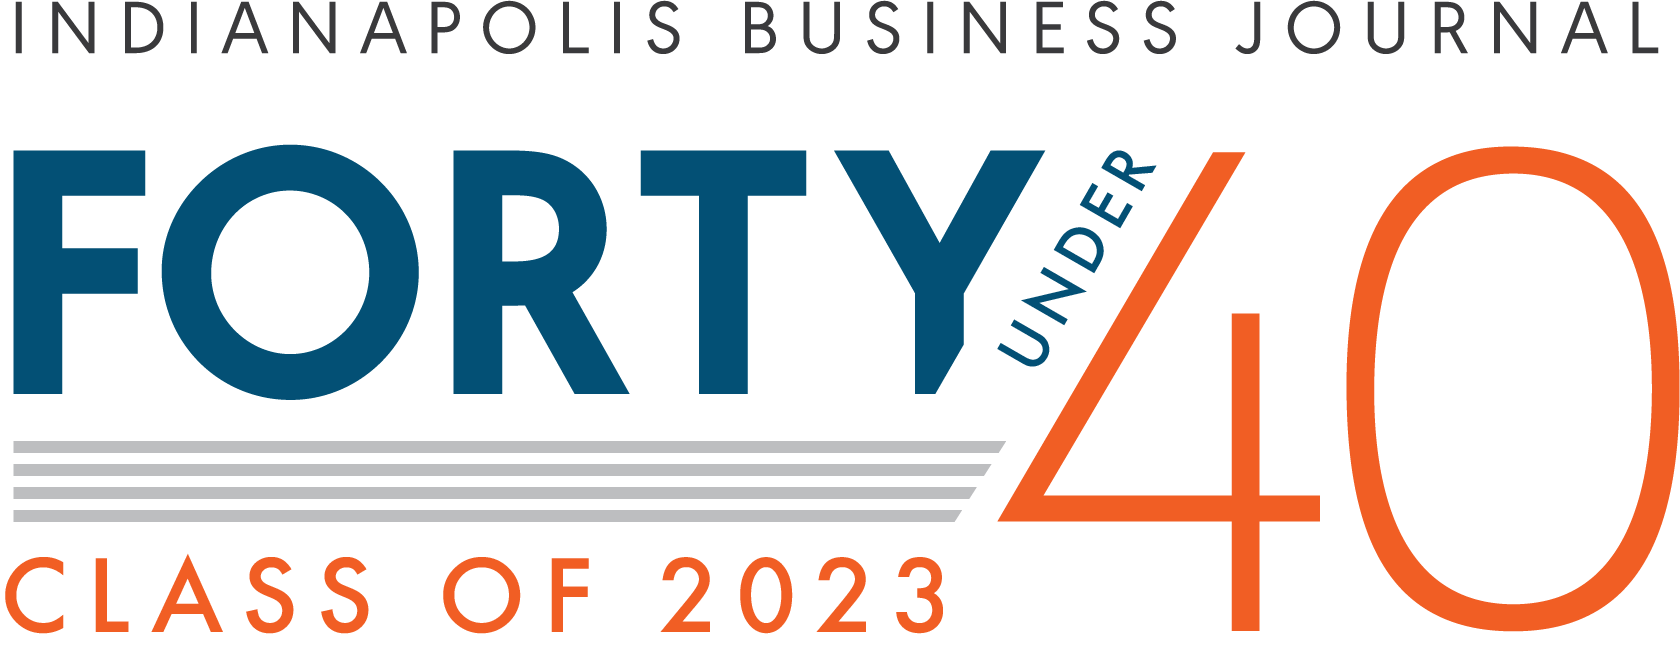 Indianapolis Business Journal Fortu Under 40 Class of 2023